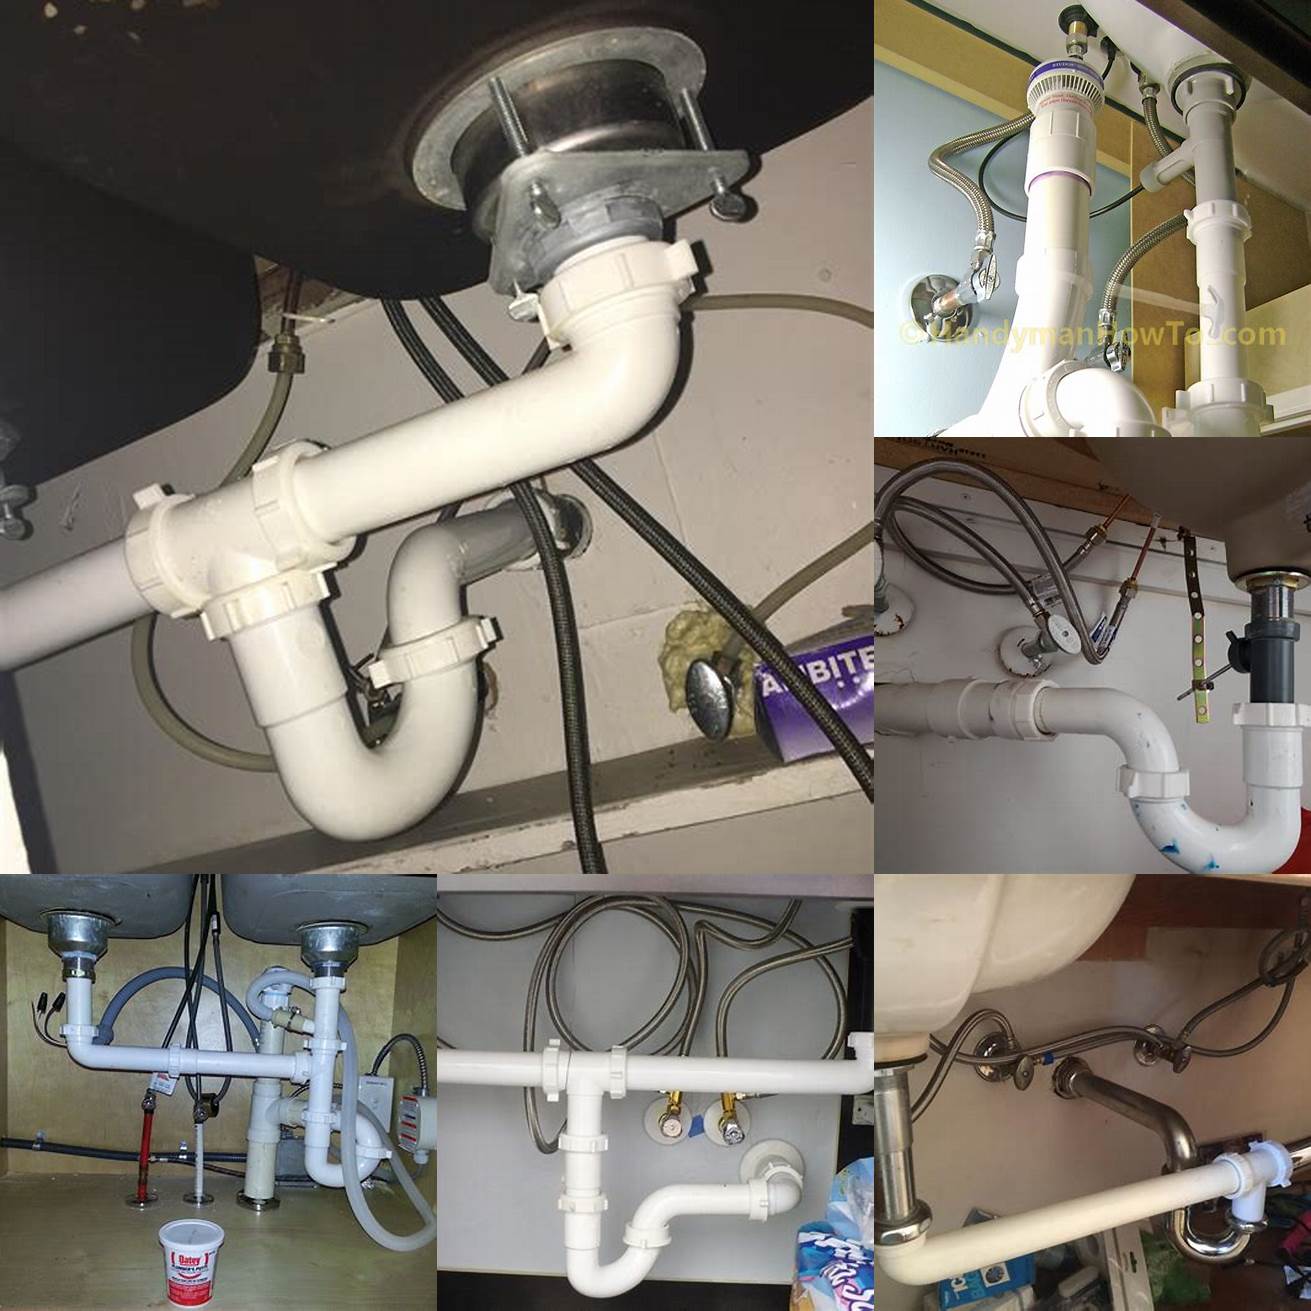 Connect the drainpipes and water supply lines to the double vanitys sink and faucet